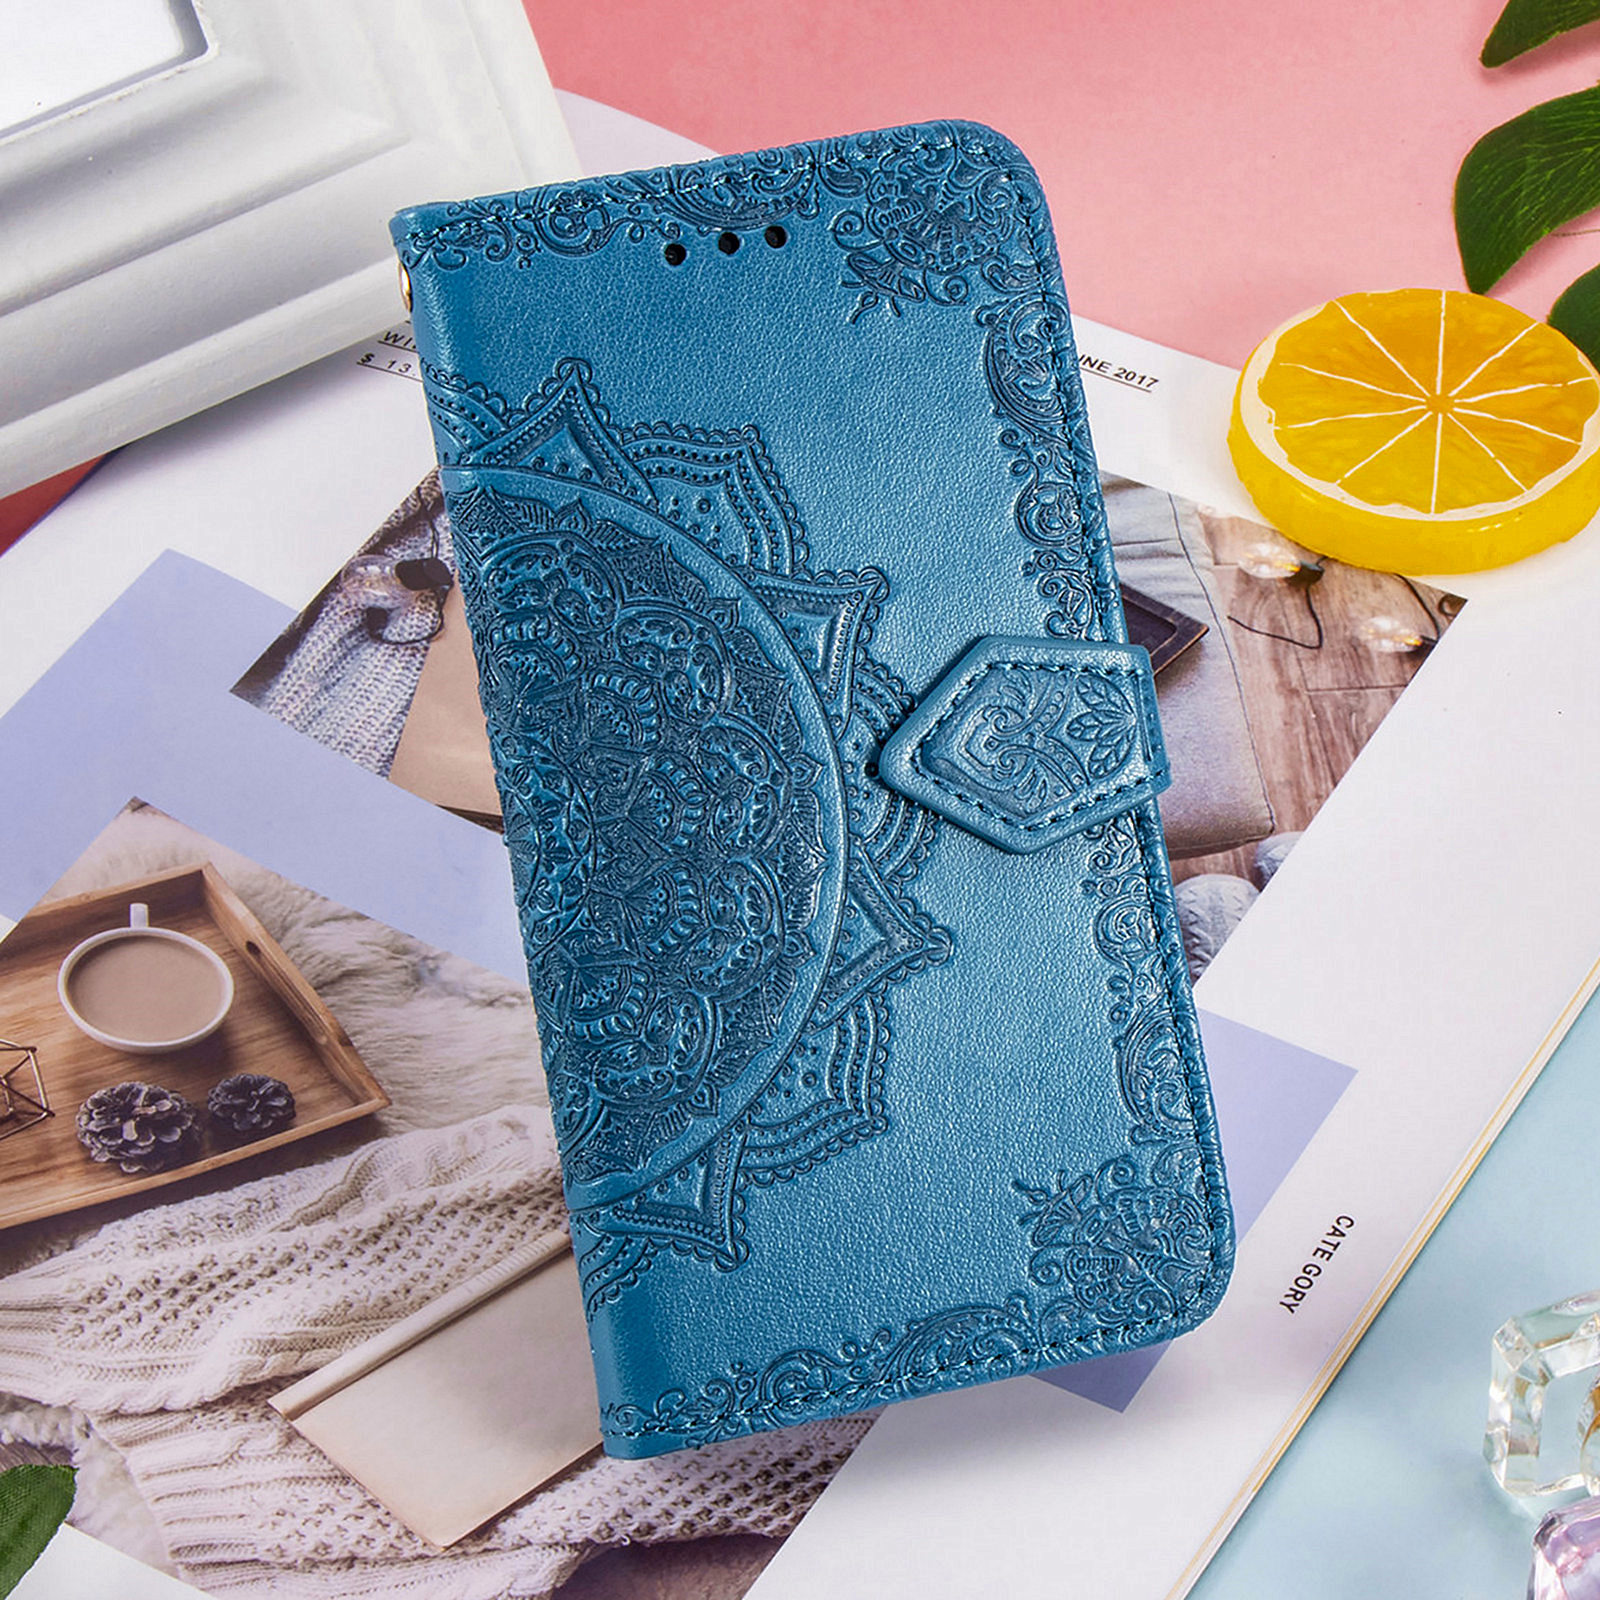 casing Xiaomi Redmi note 6 pro note 7 Mi Poco phone F1 max 3 8 lite 9 se play Phone case Mandala flower Bumper PU Flip Leather Protective Support Cover Wallet card slot blue pink gray purple green black Magnetic